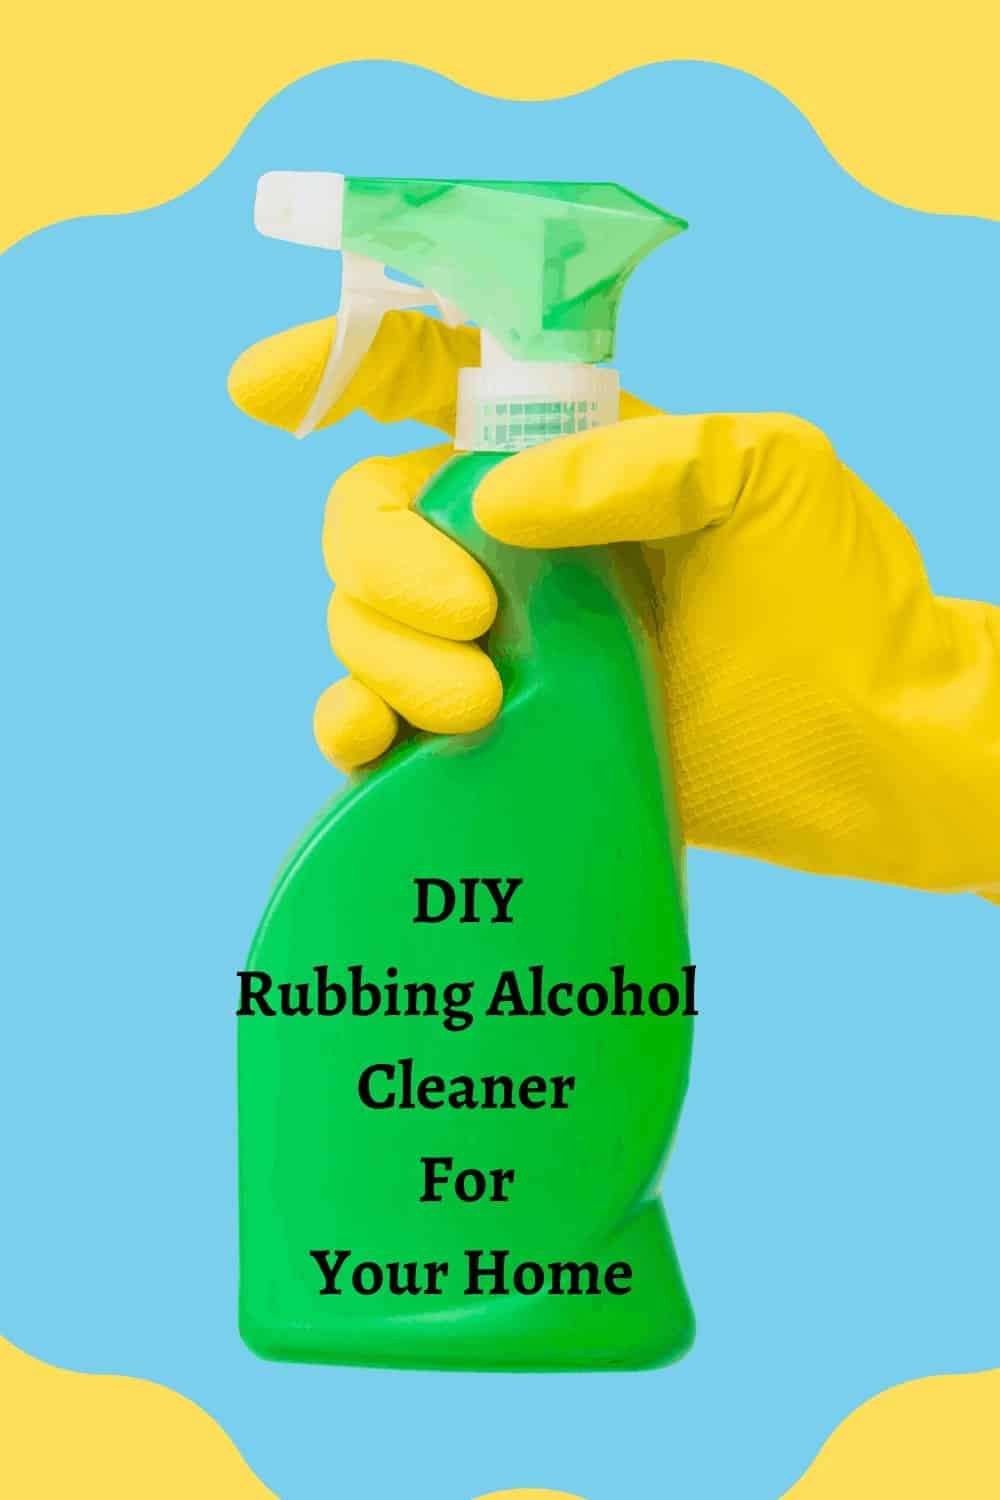 DIY Rubbing Alcohol Cleaner For Your Home in hand